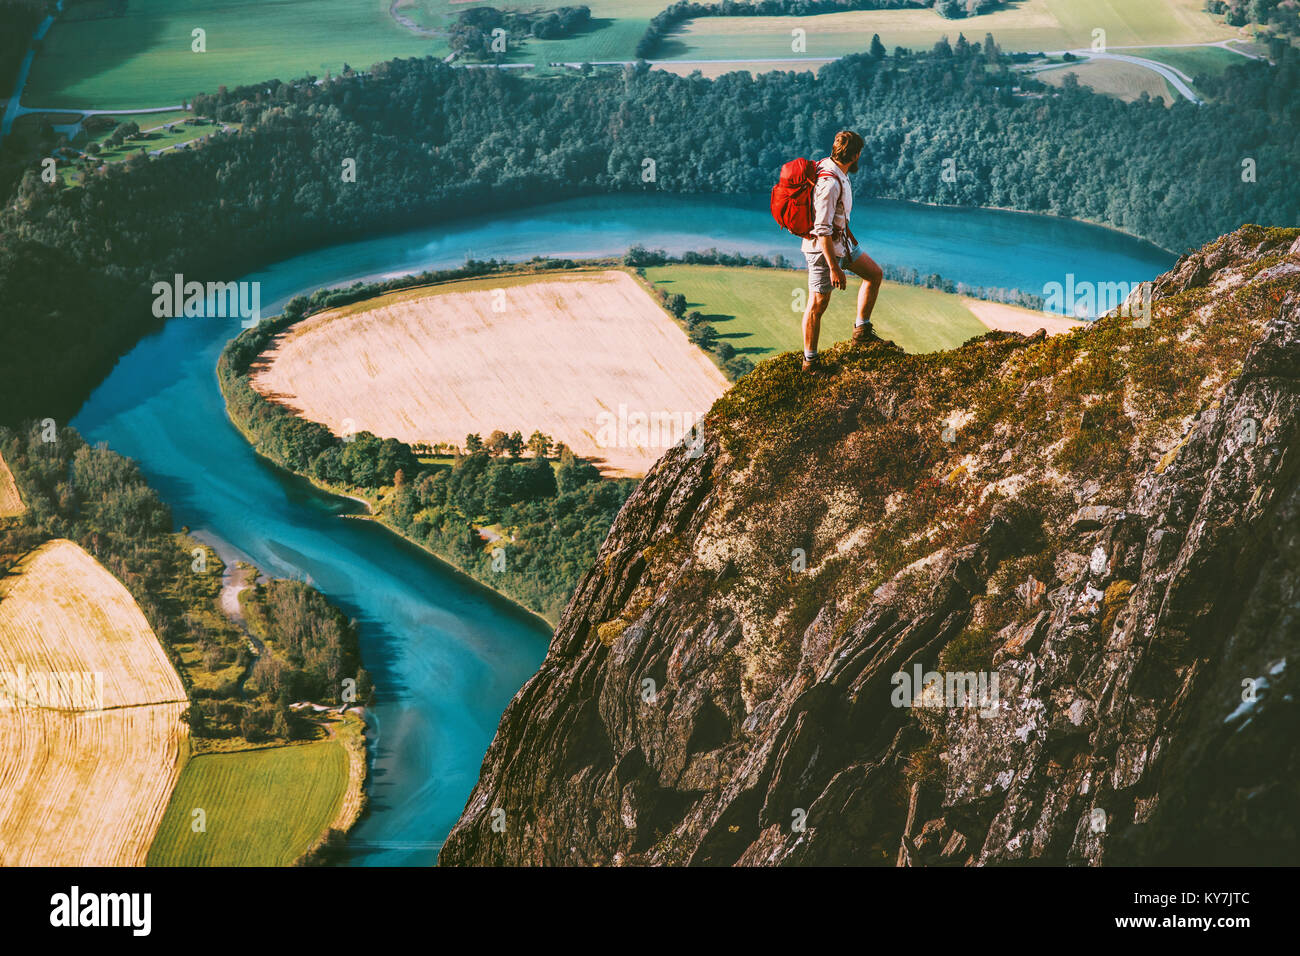 Hiking adventure in Norway mountains Man with backpack on cliff Travel lifestyle concept active weekend summer vacations river aerial view Stock Photo